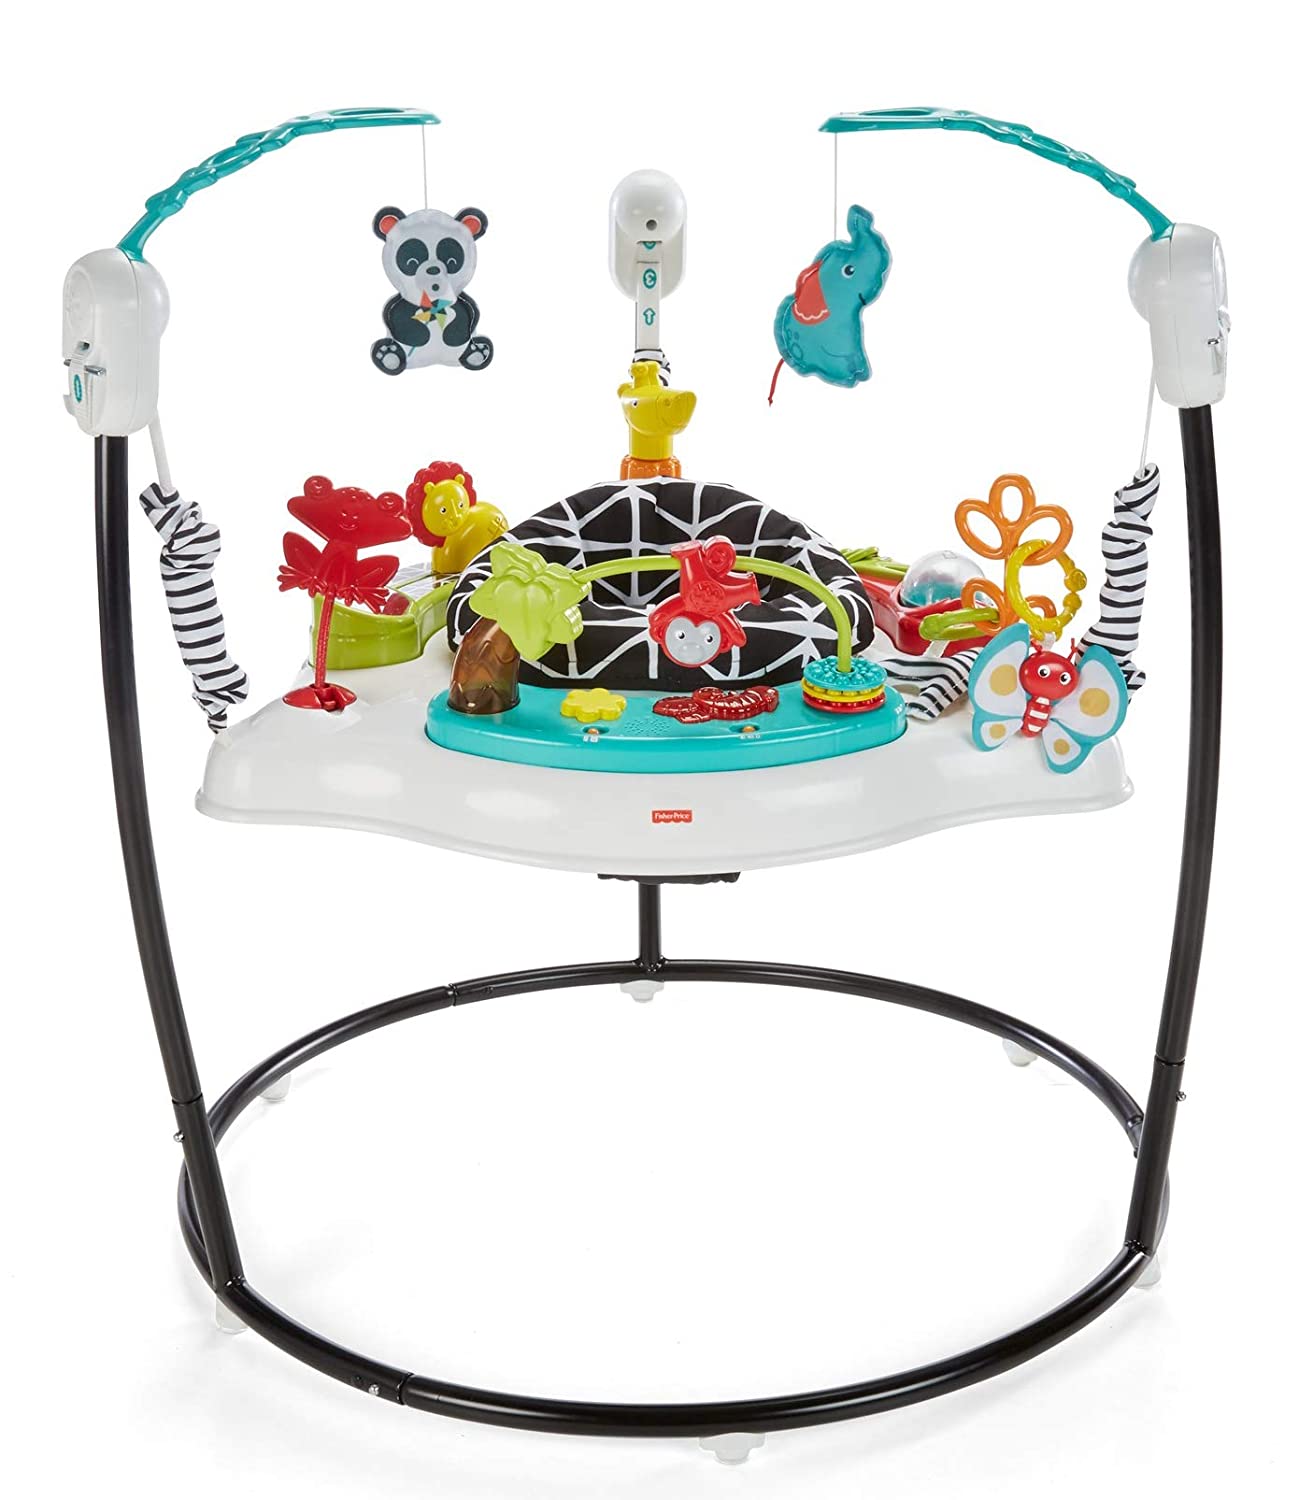 7 Best Fisher Price Jumperoo Reviews in 2022 2